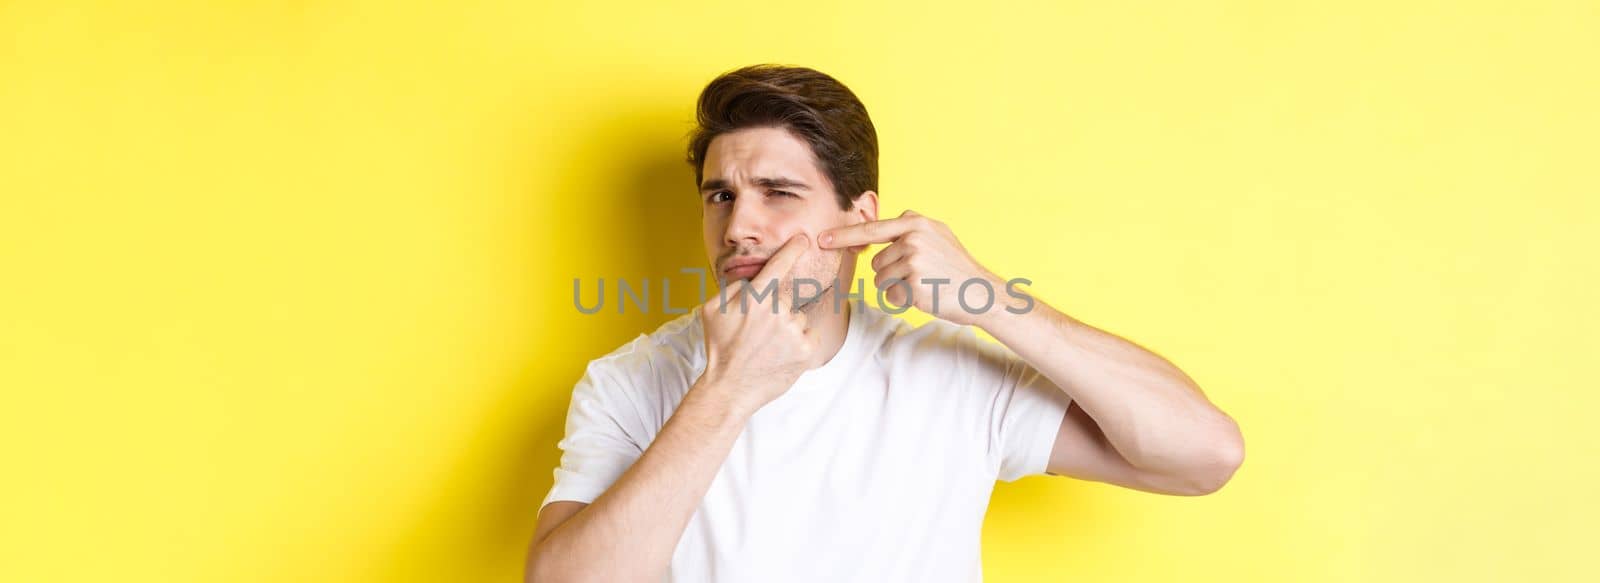 Young man pop a pimple on cheek, standing over yellow background. Concept of skin care and acne.